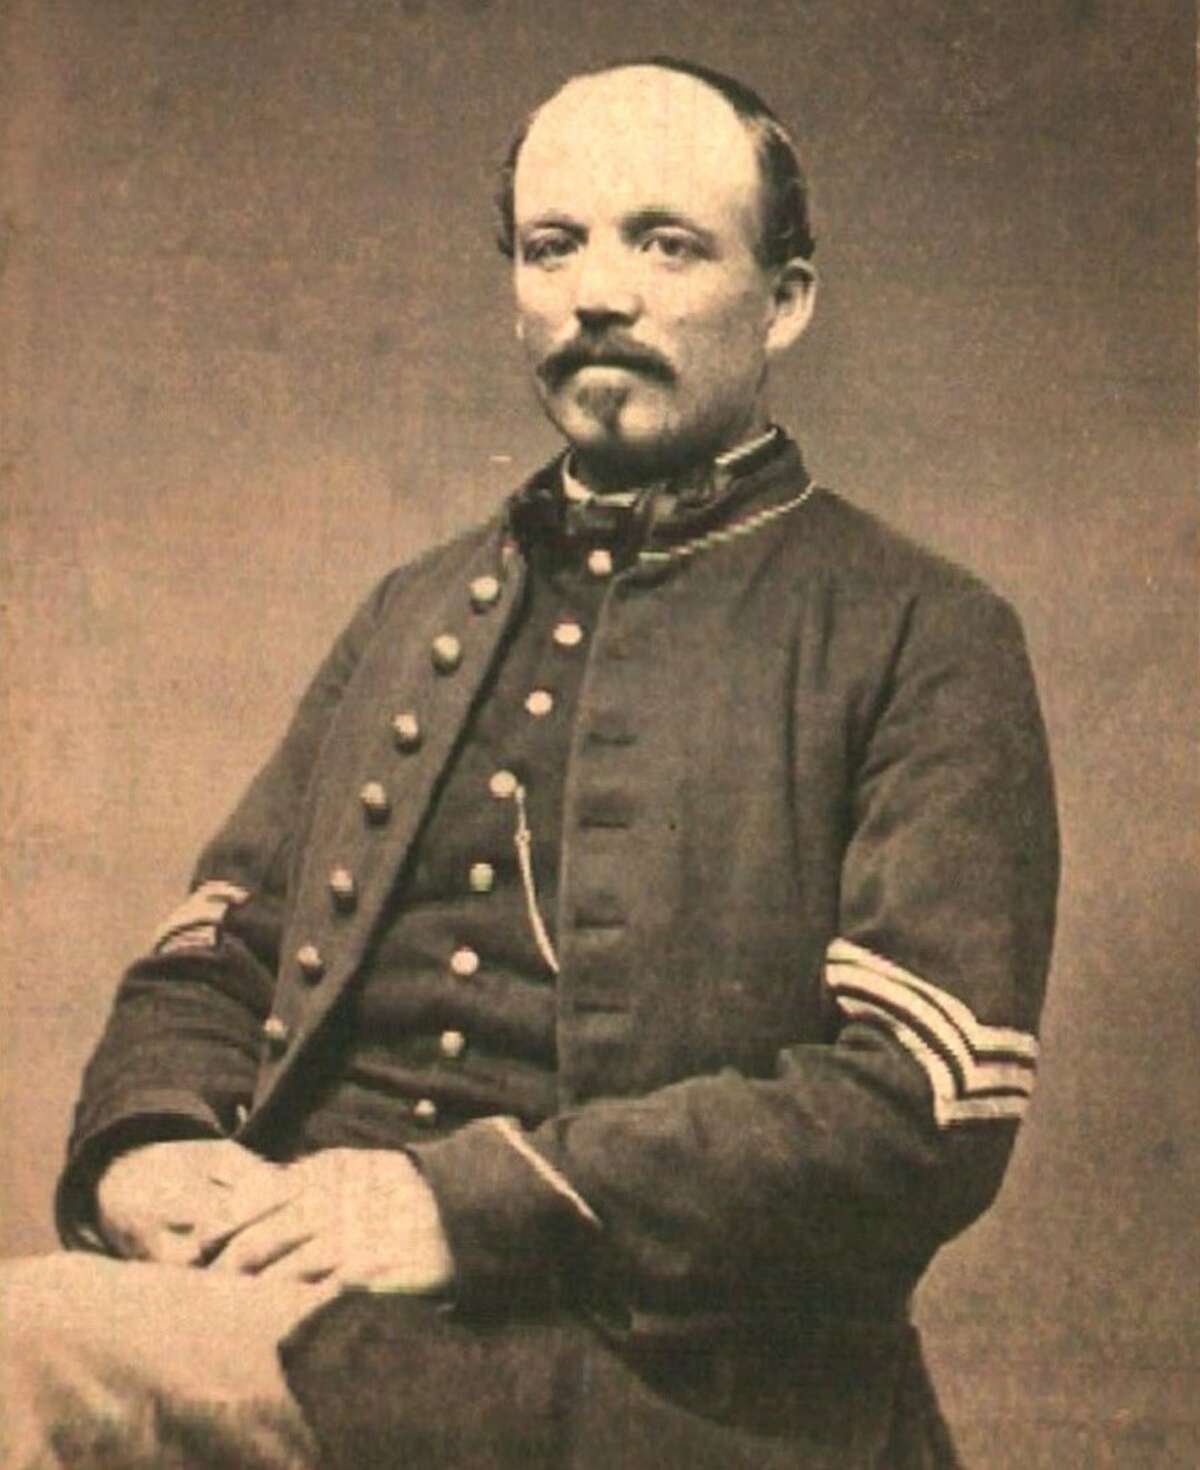 Sgt. Seth Plumb of the 8th Connecticut Volunteer Infantry.